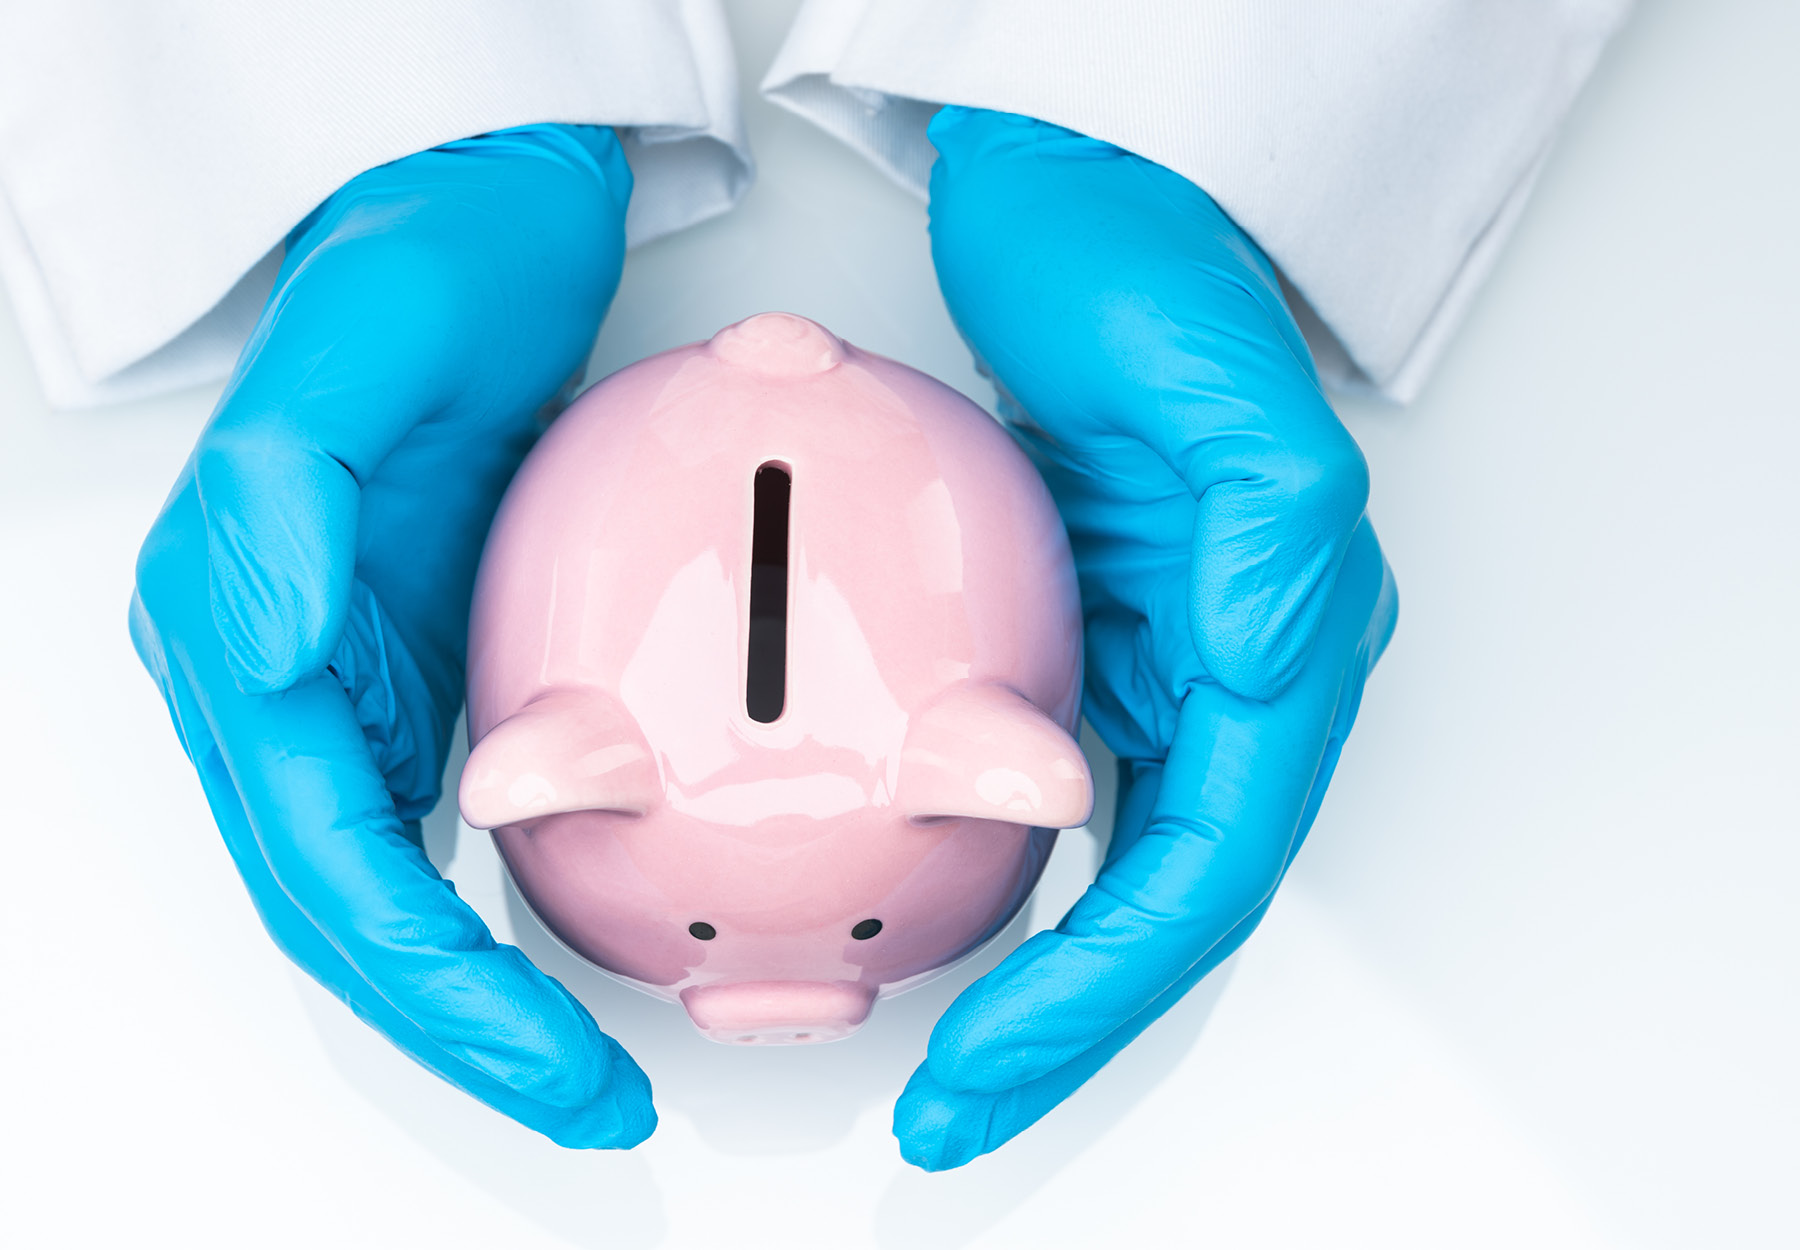 hands in blue medical gloves holding a piggy bank to symbolize COVID1-9 funding